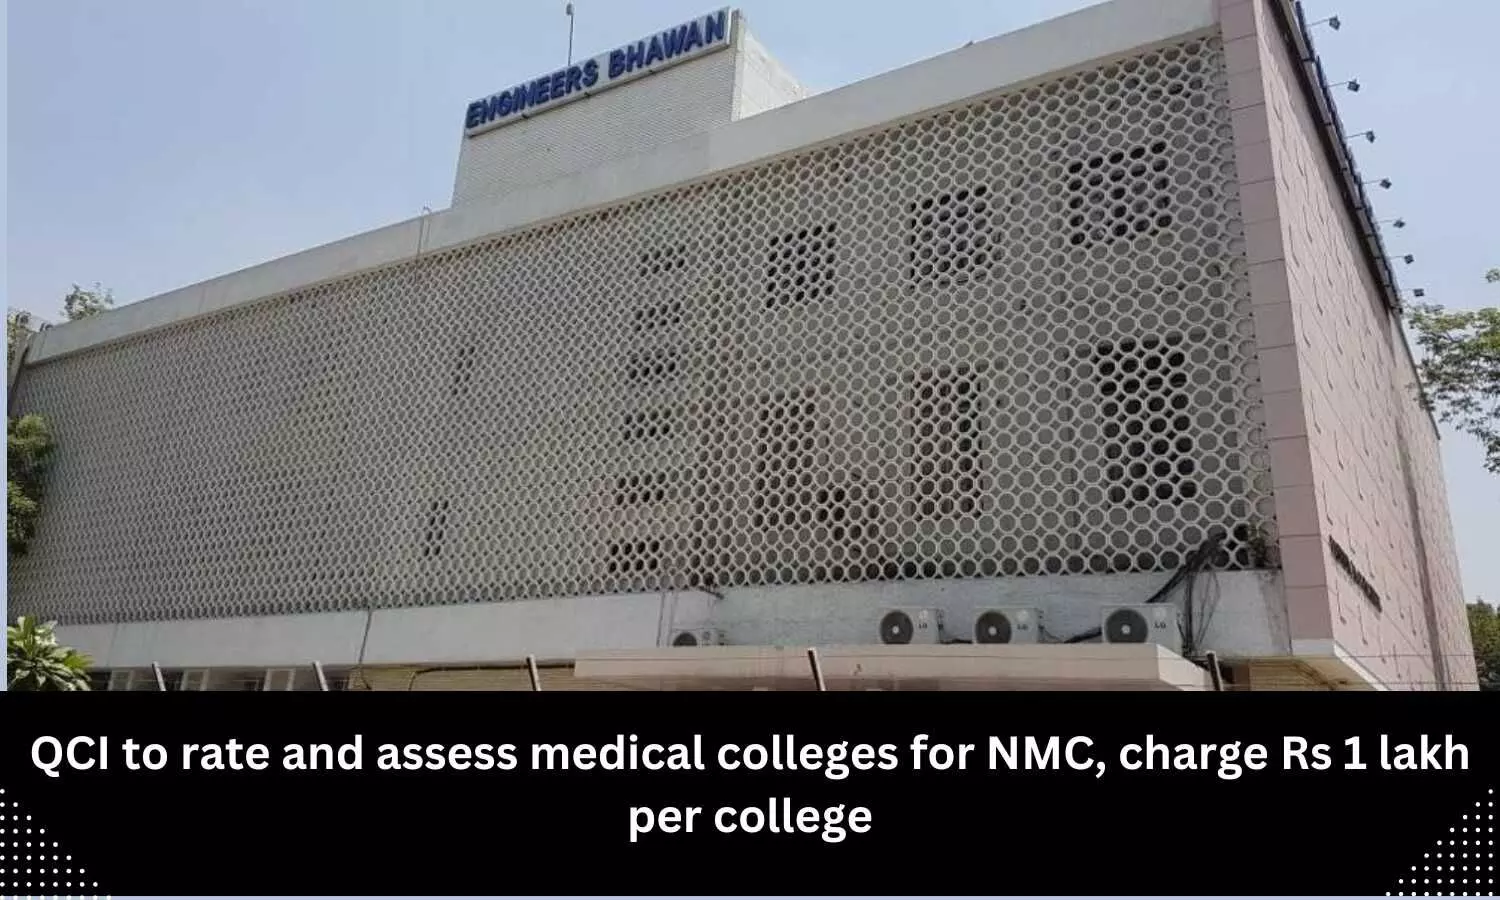 QCI to assess, rate medical colleges for NMC, charge Rs 1 lakh per college